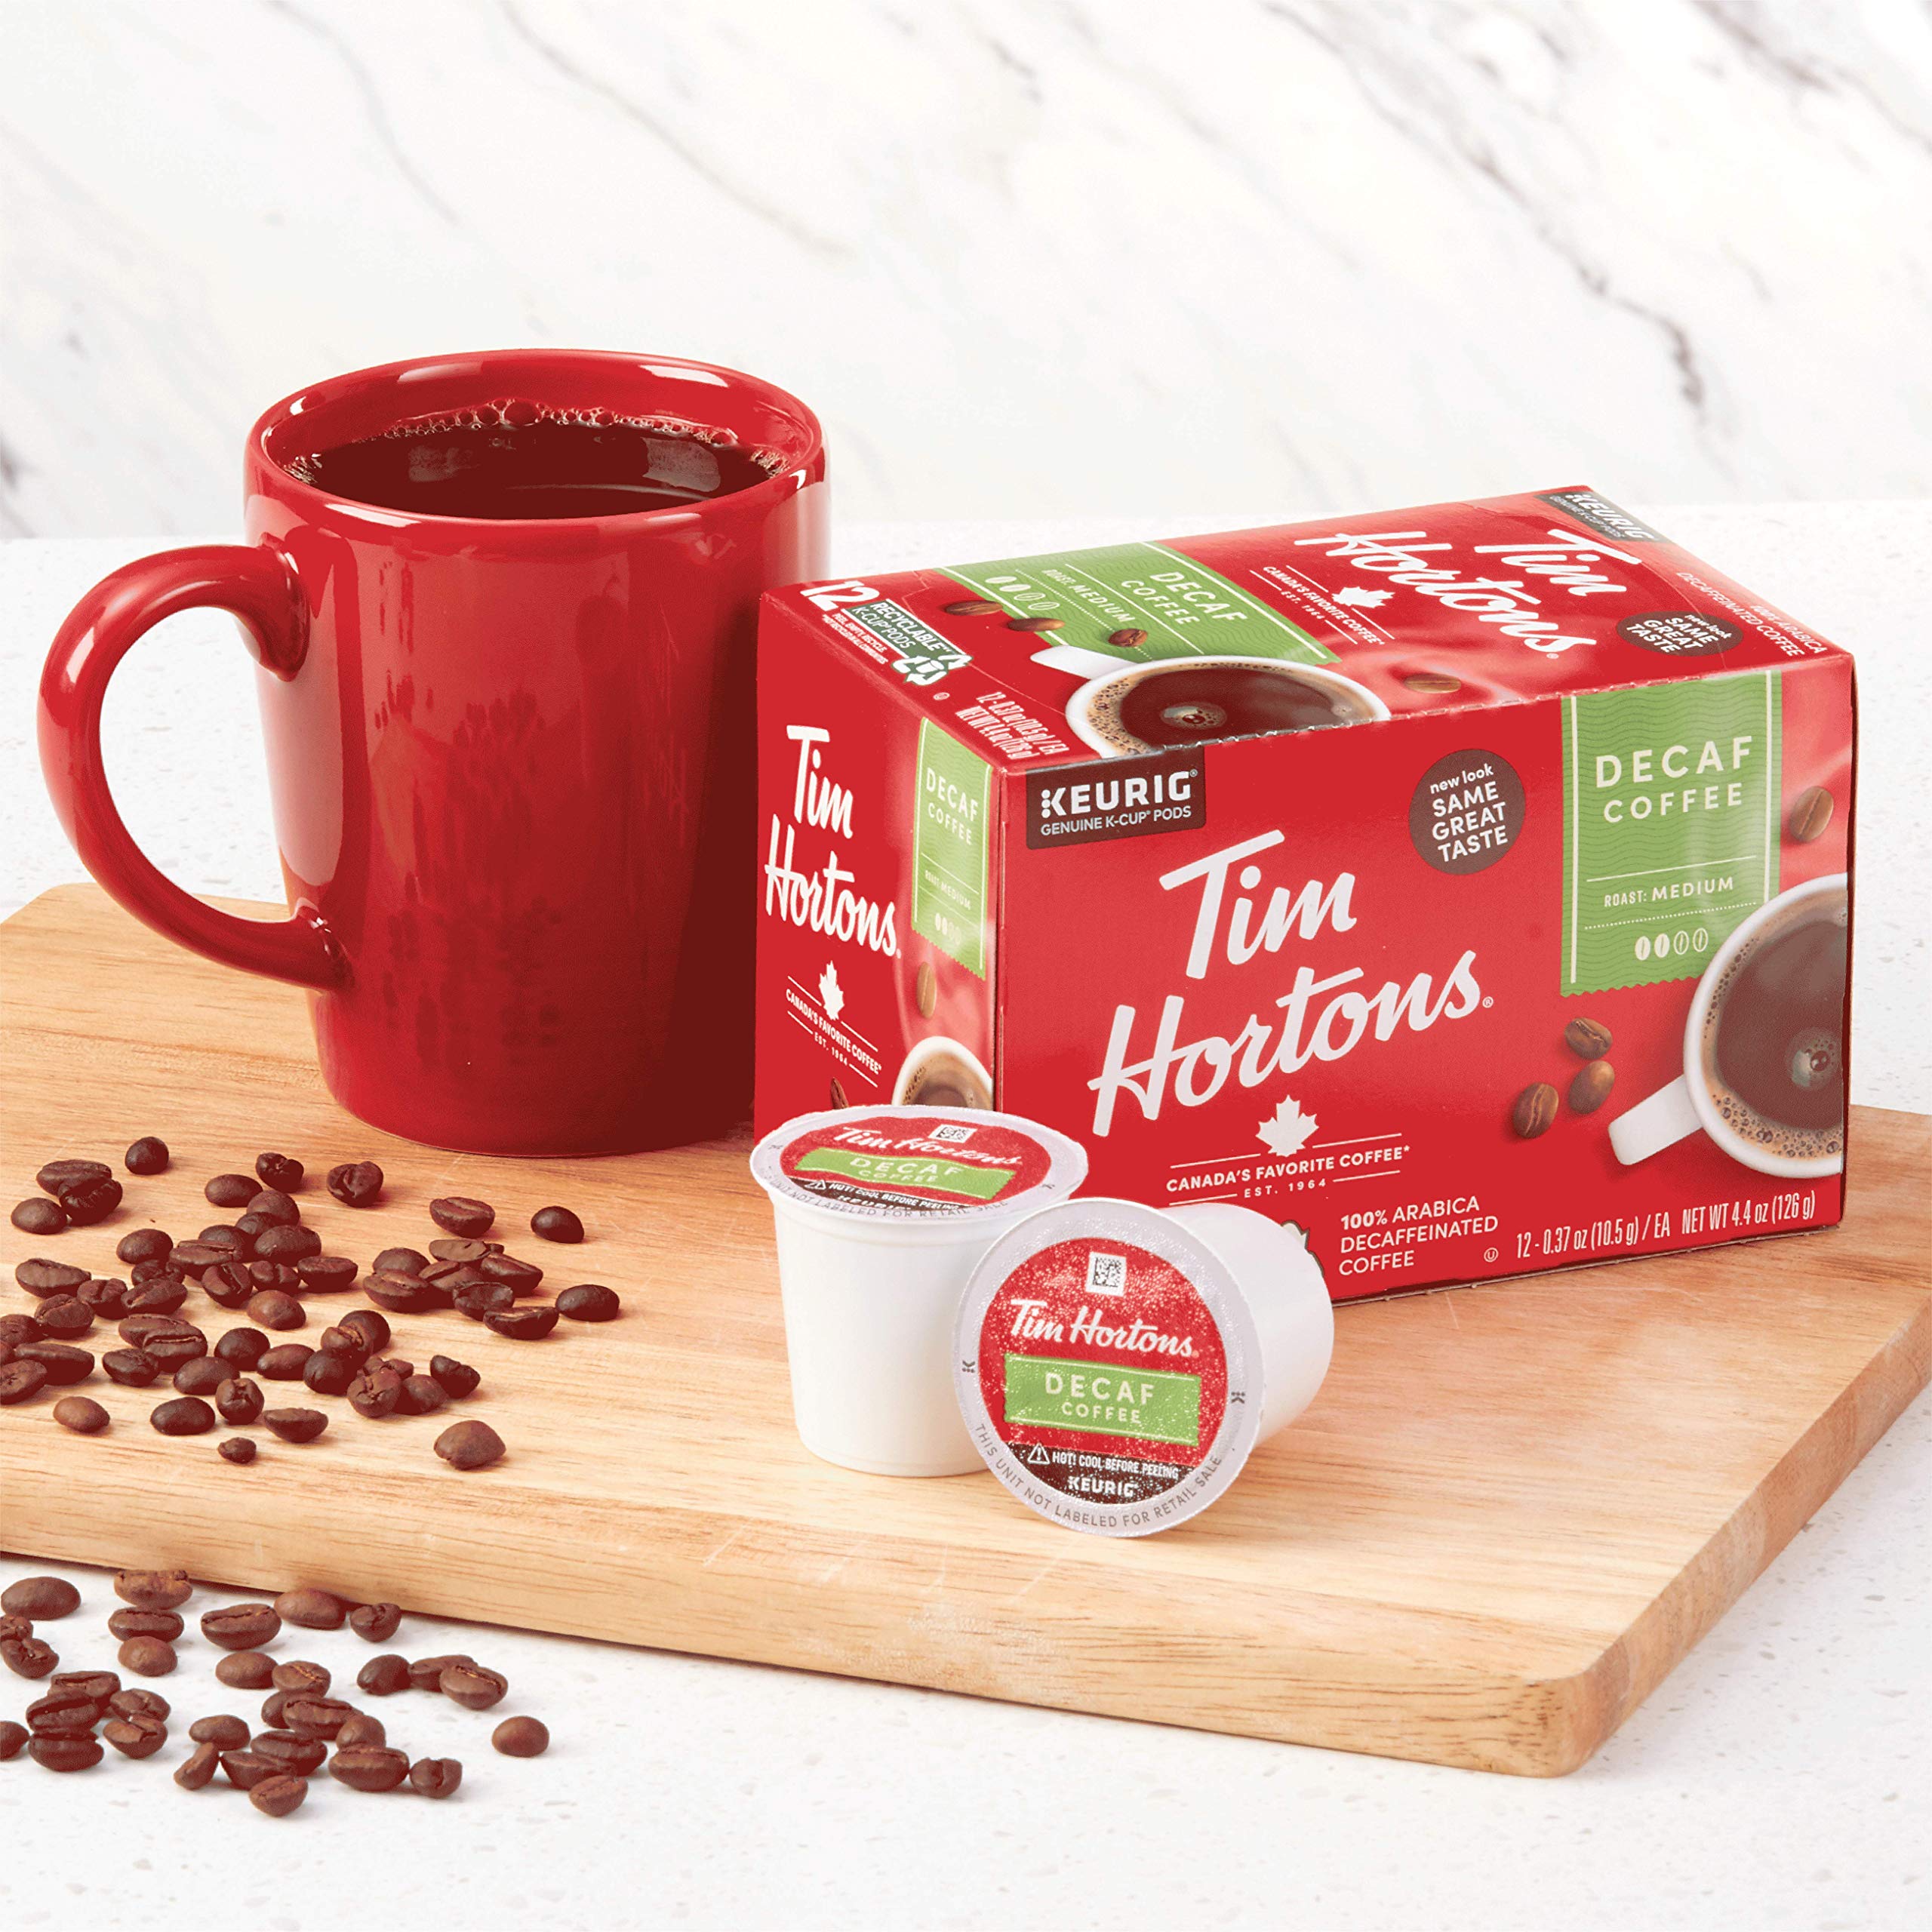 Tim Hortons Decaf, Medium Roast Coffee, Single-Serve K-Cup Pods Compatible with Keurig Brewers, 12 Count (Pack of 6), Red